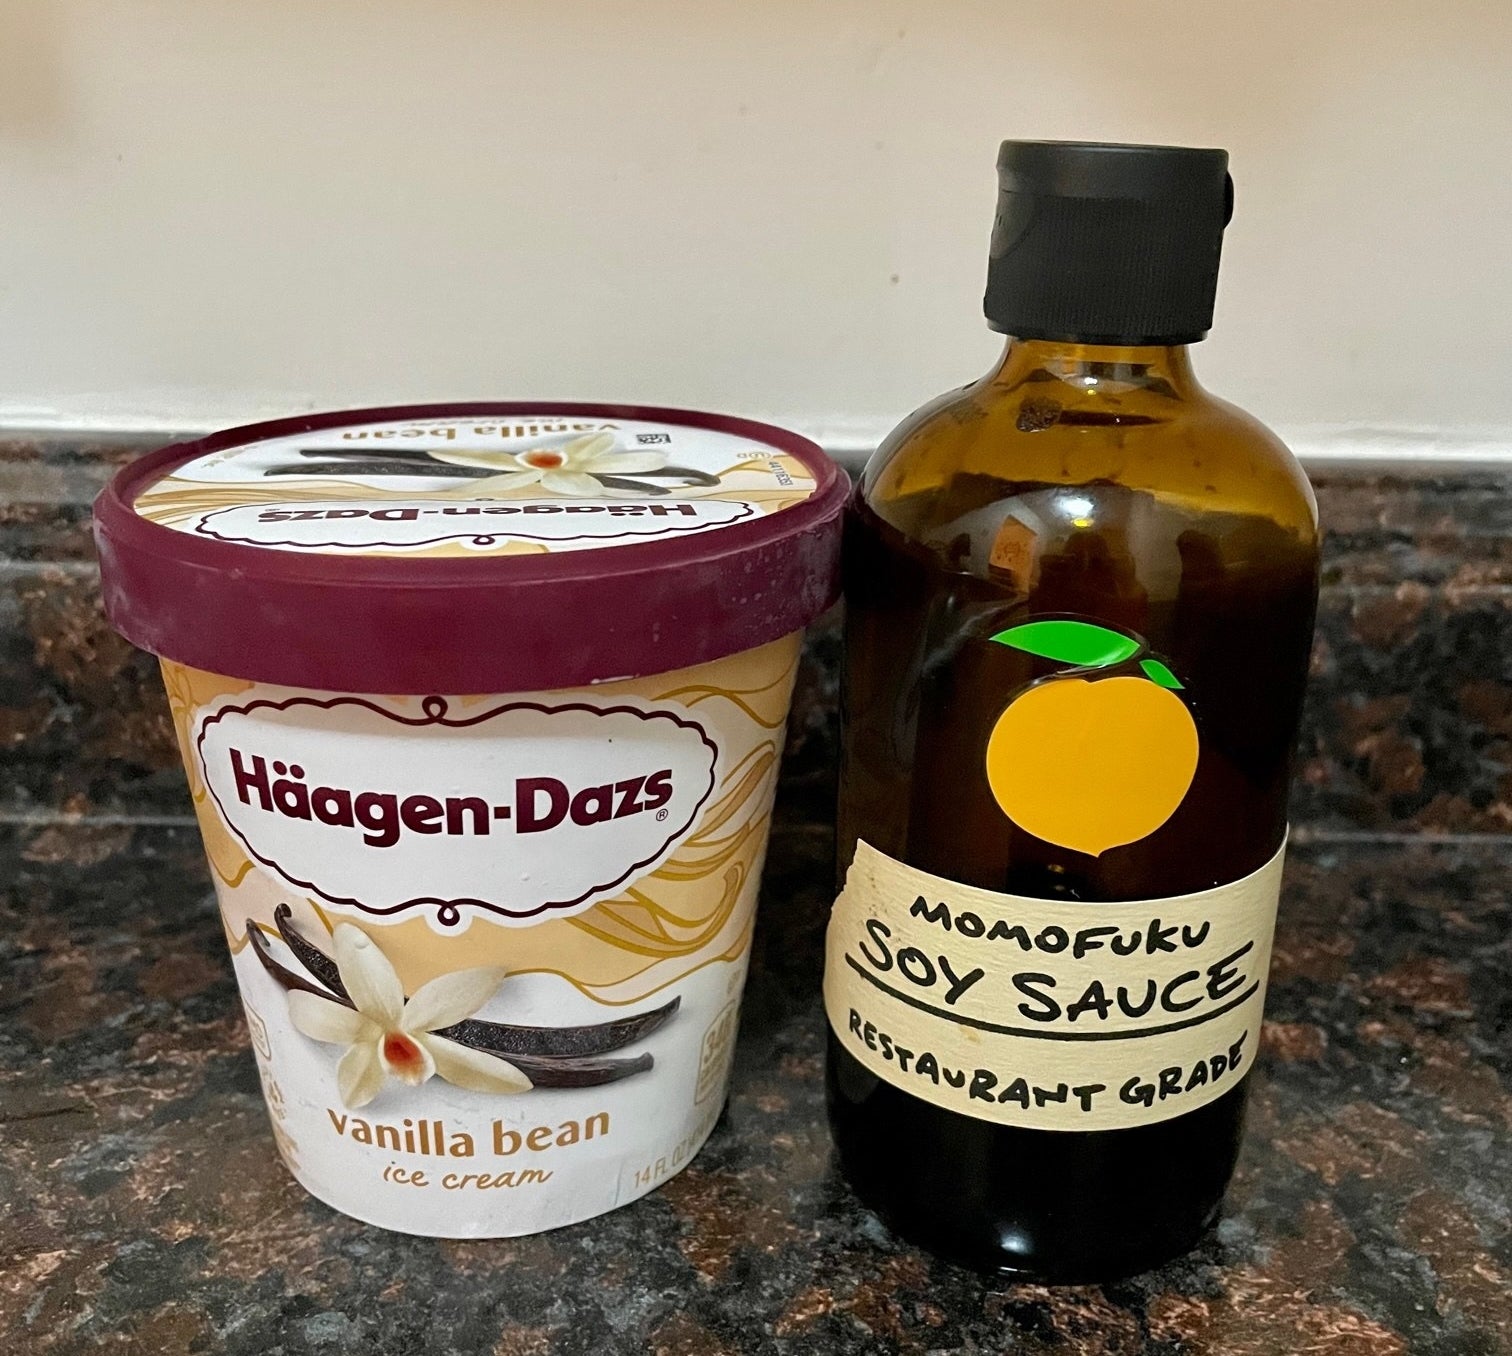 Ice cream and soy sauce